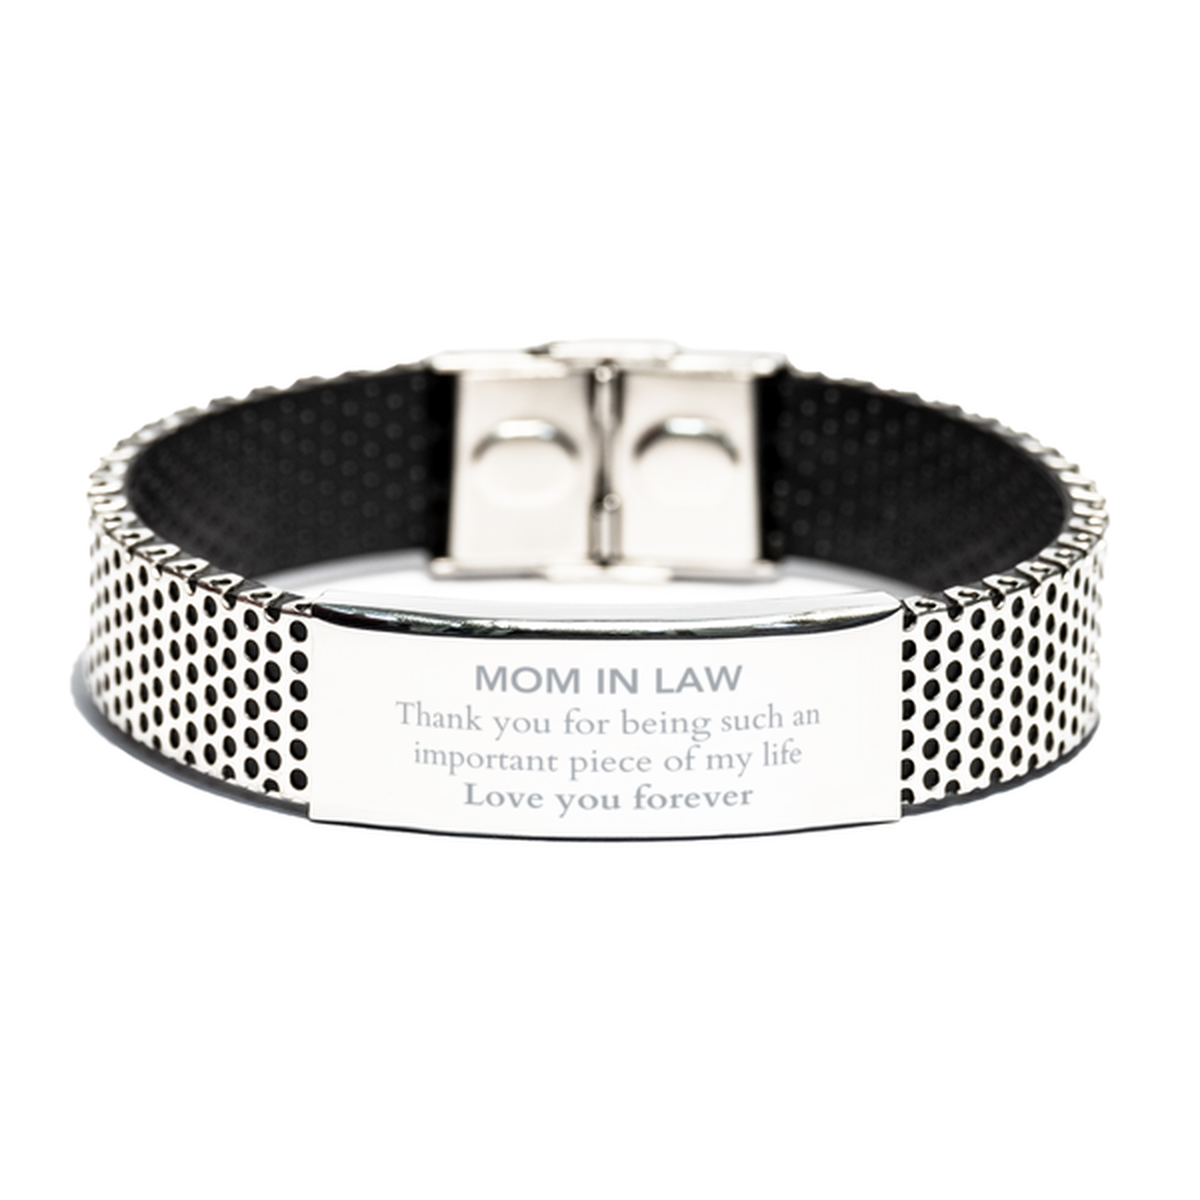 Appropriate Mom In Law Stainless Steel Bracelet Epic Birthday Gifts for Mom In Law Thank you for being such an important piece of my life Mom In Law Christmas Mothers Fathers Day